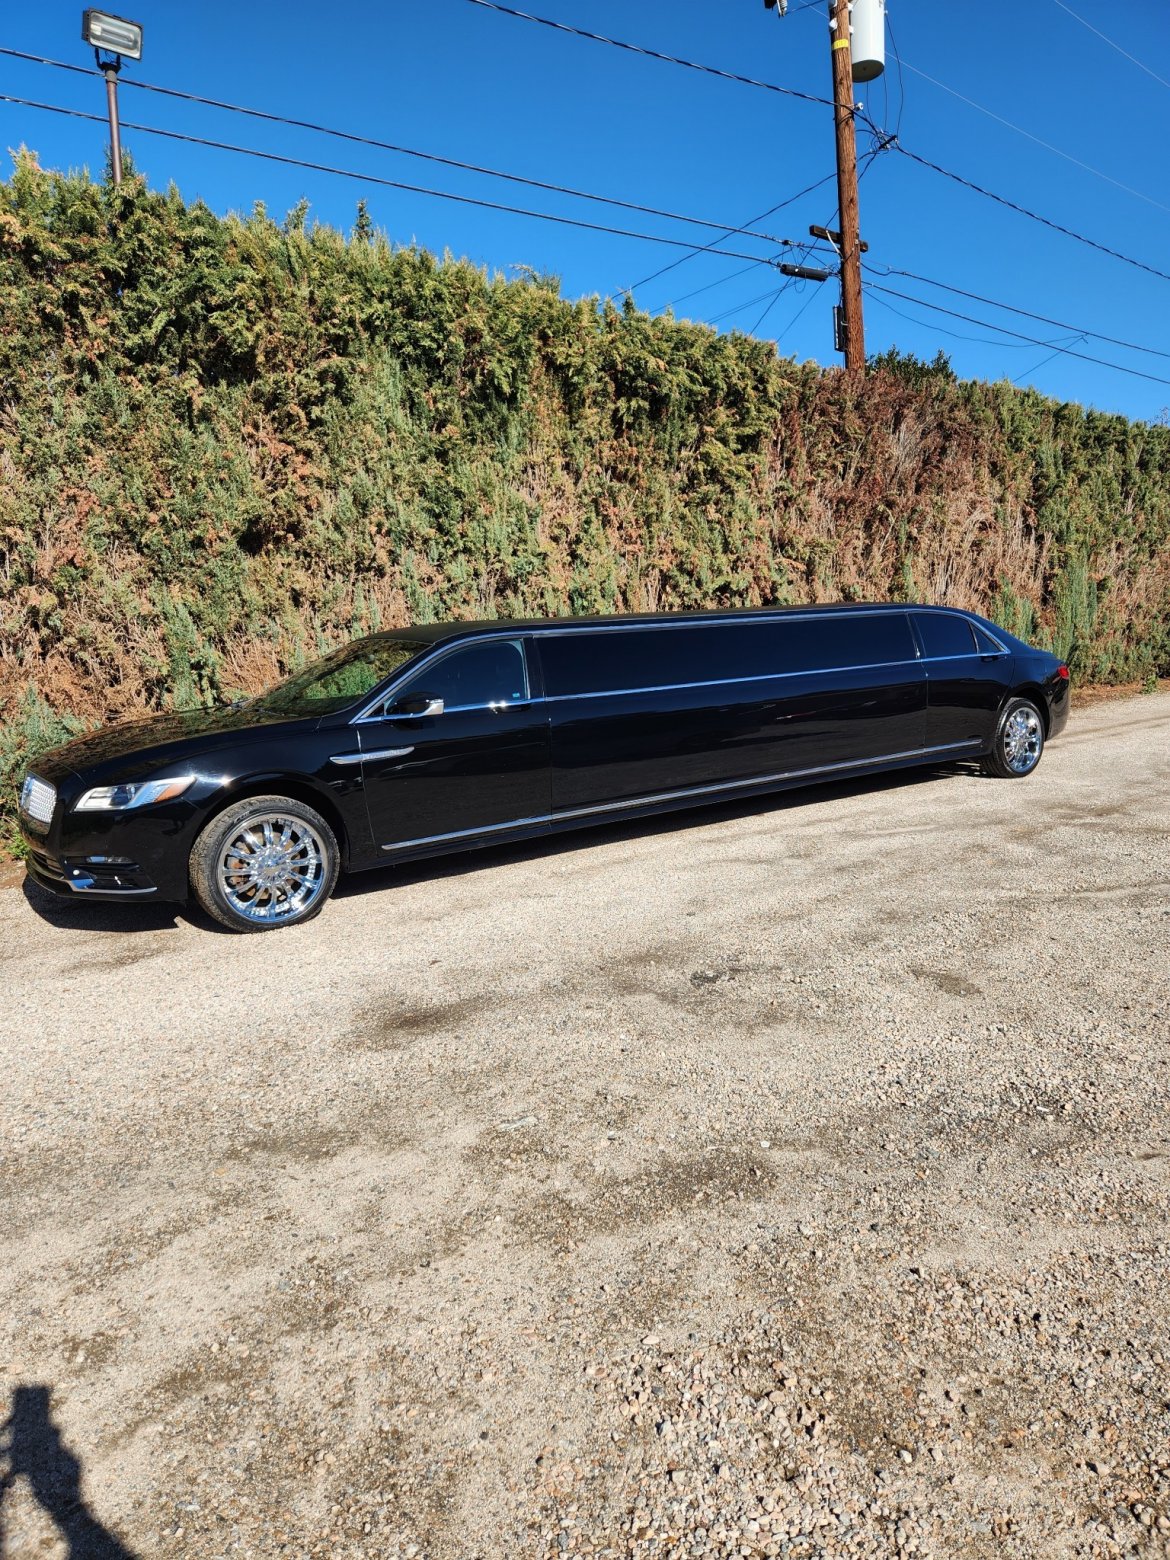 Limousine for sale: 2017 Lincoln Continental by Pinnacle